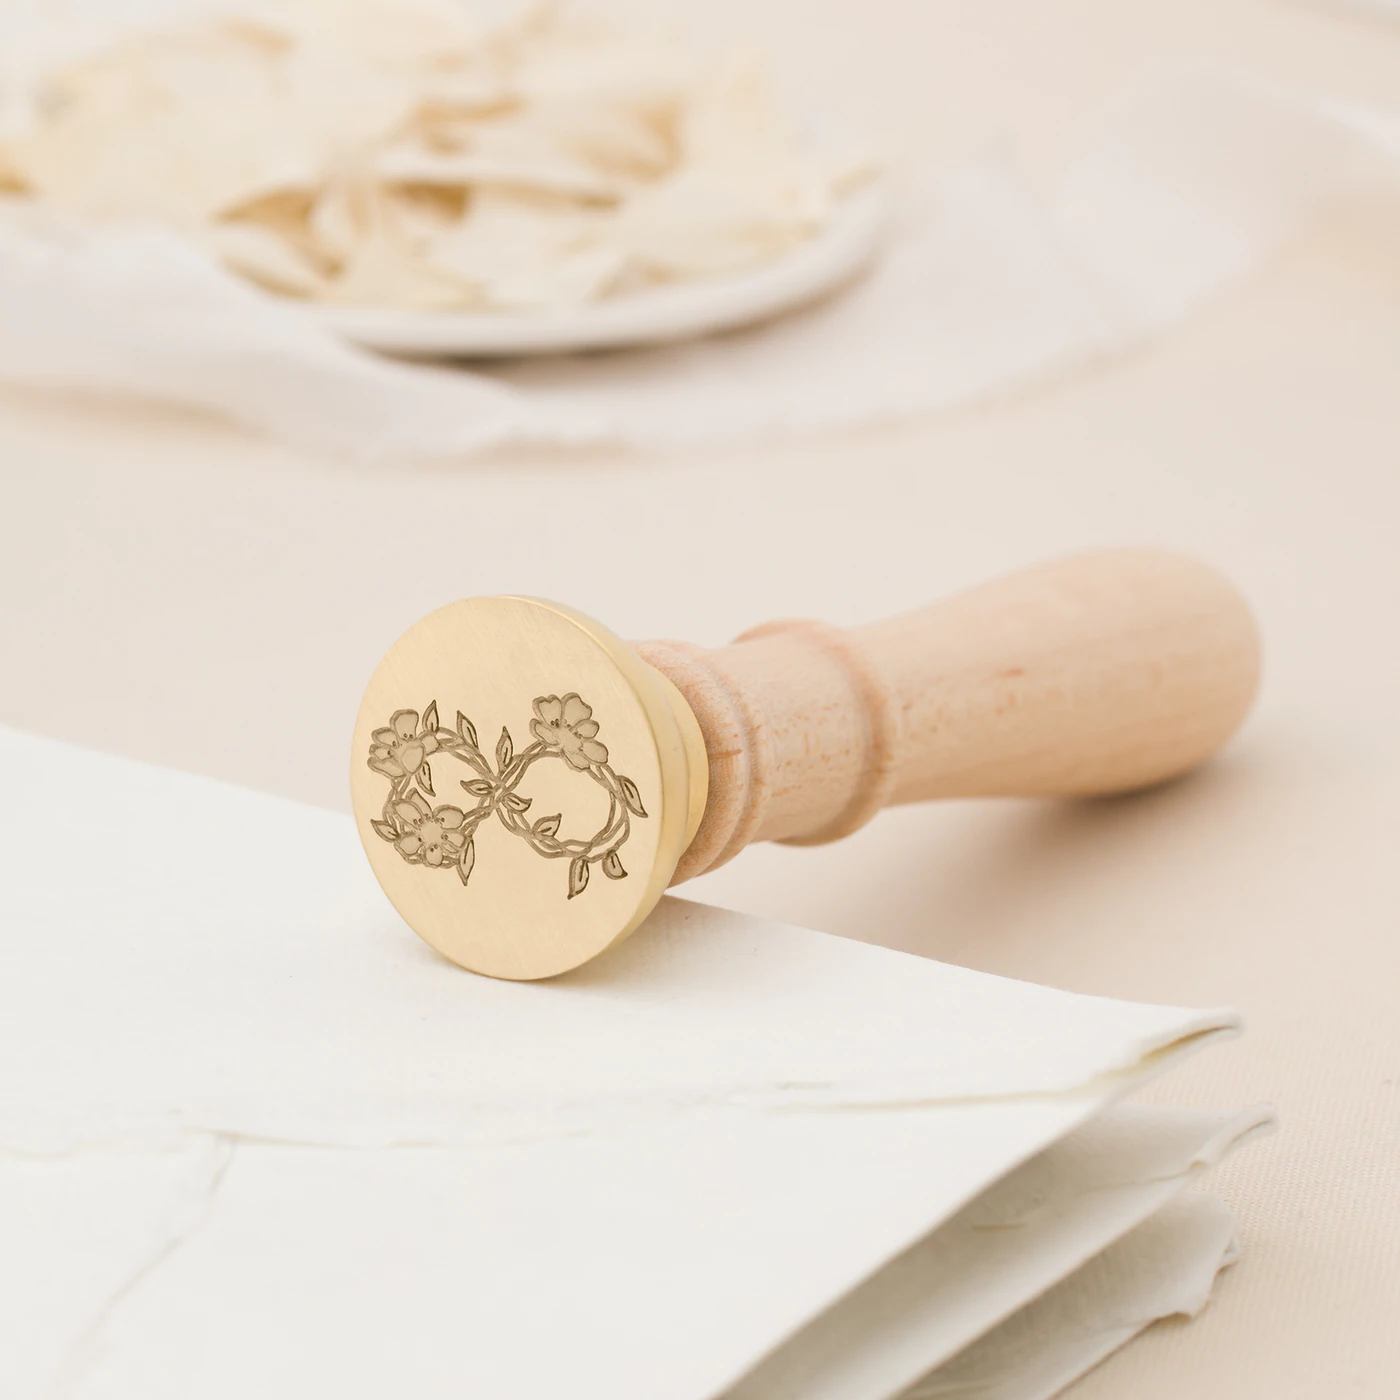 Evermore Wax Seal Stamp